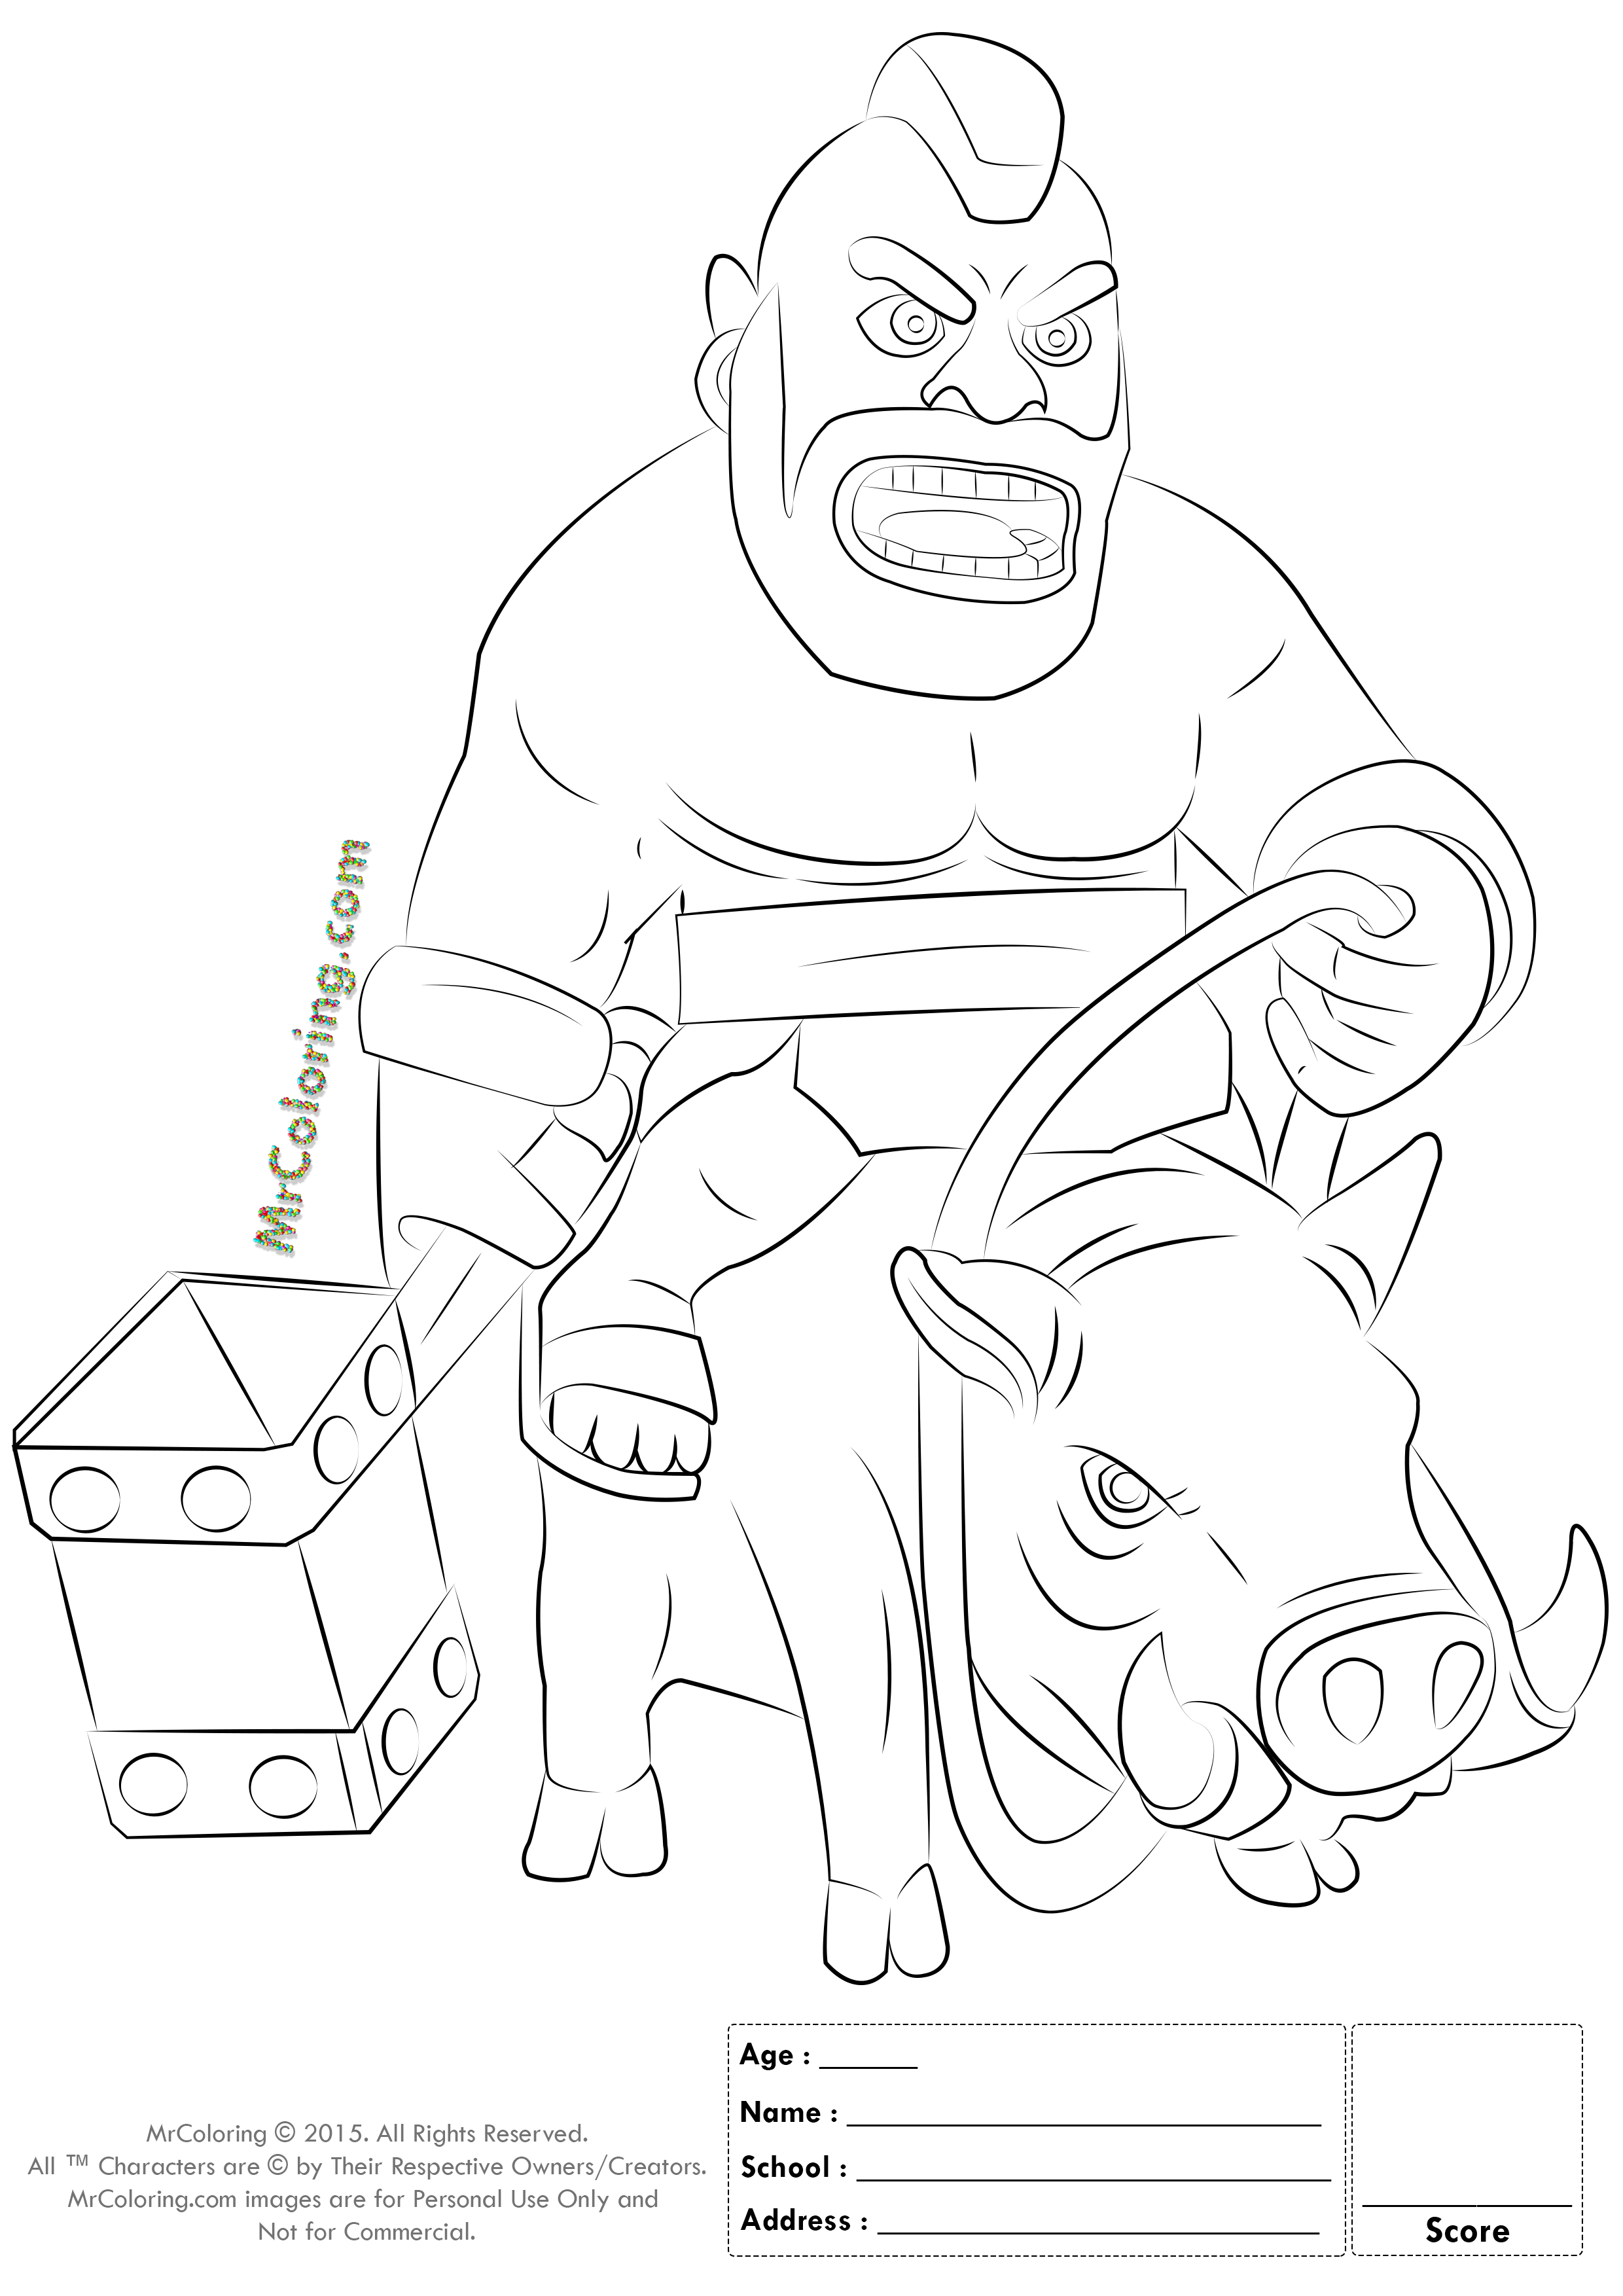 Clash Of Clans Hog Rider Coloring Sketch Coloring Page Coloring Pages Clash Royale Clash Royale Drawings